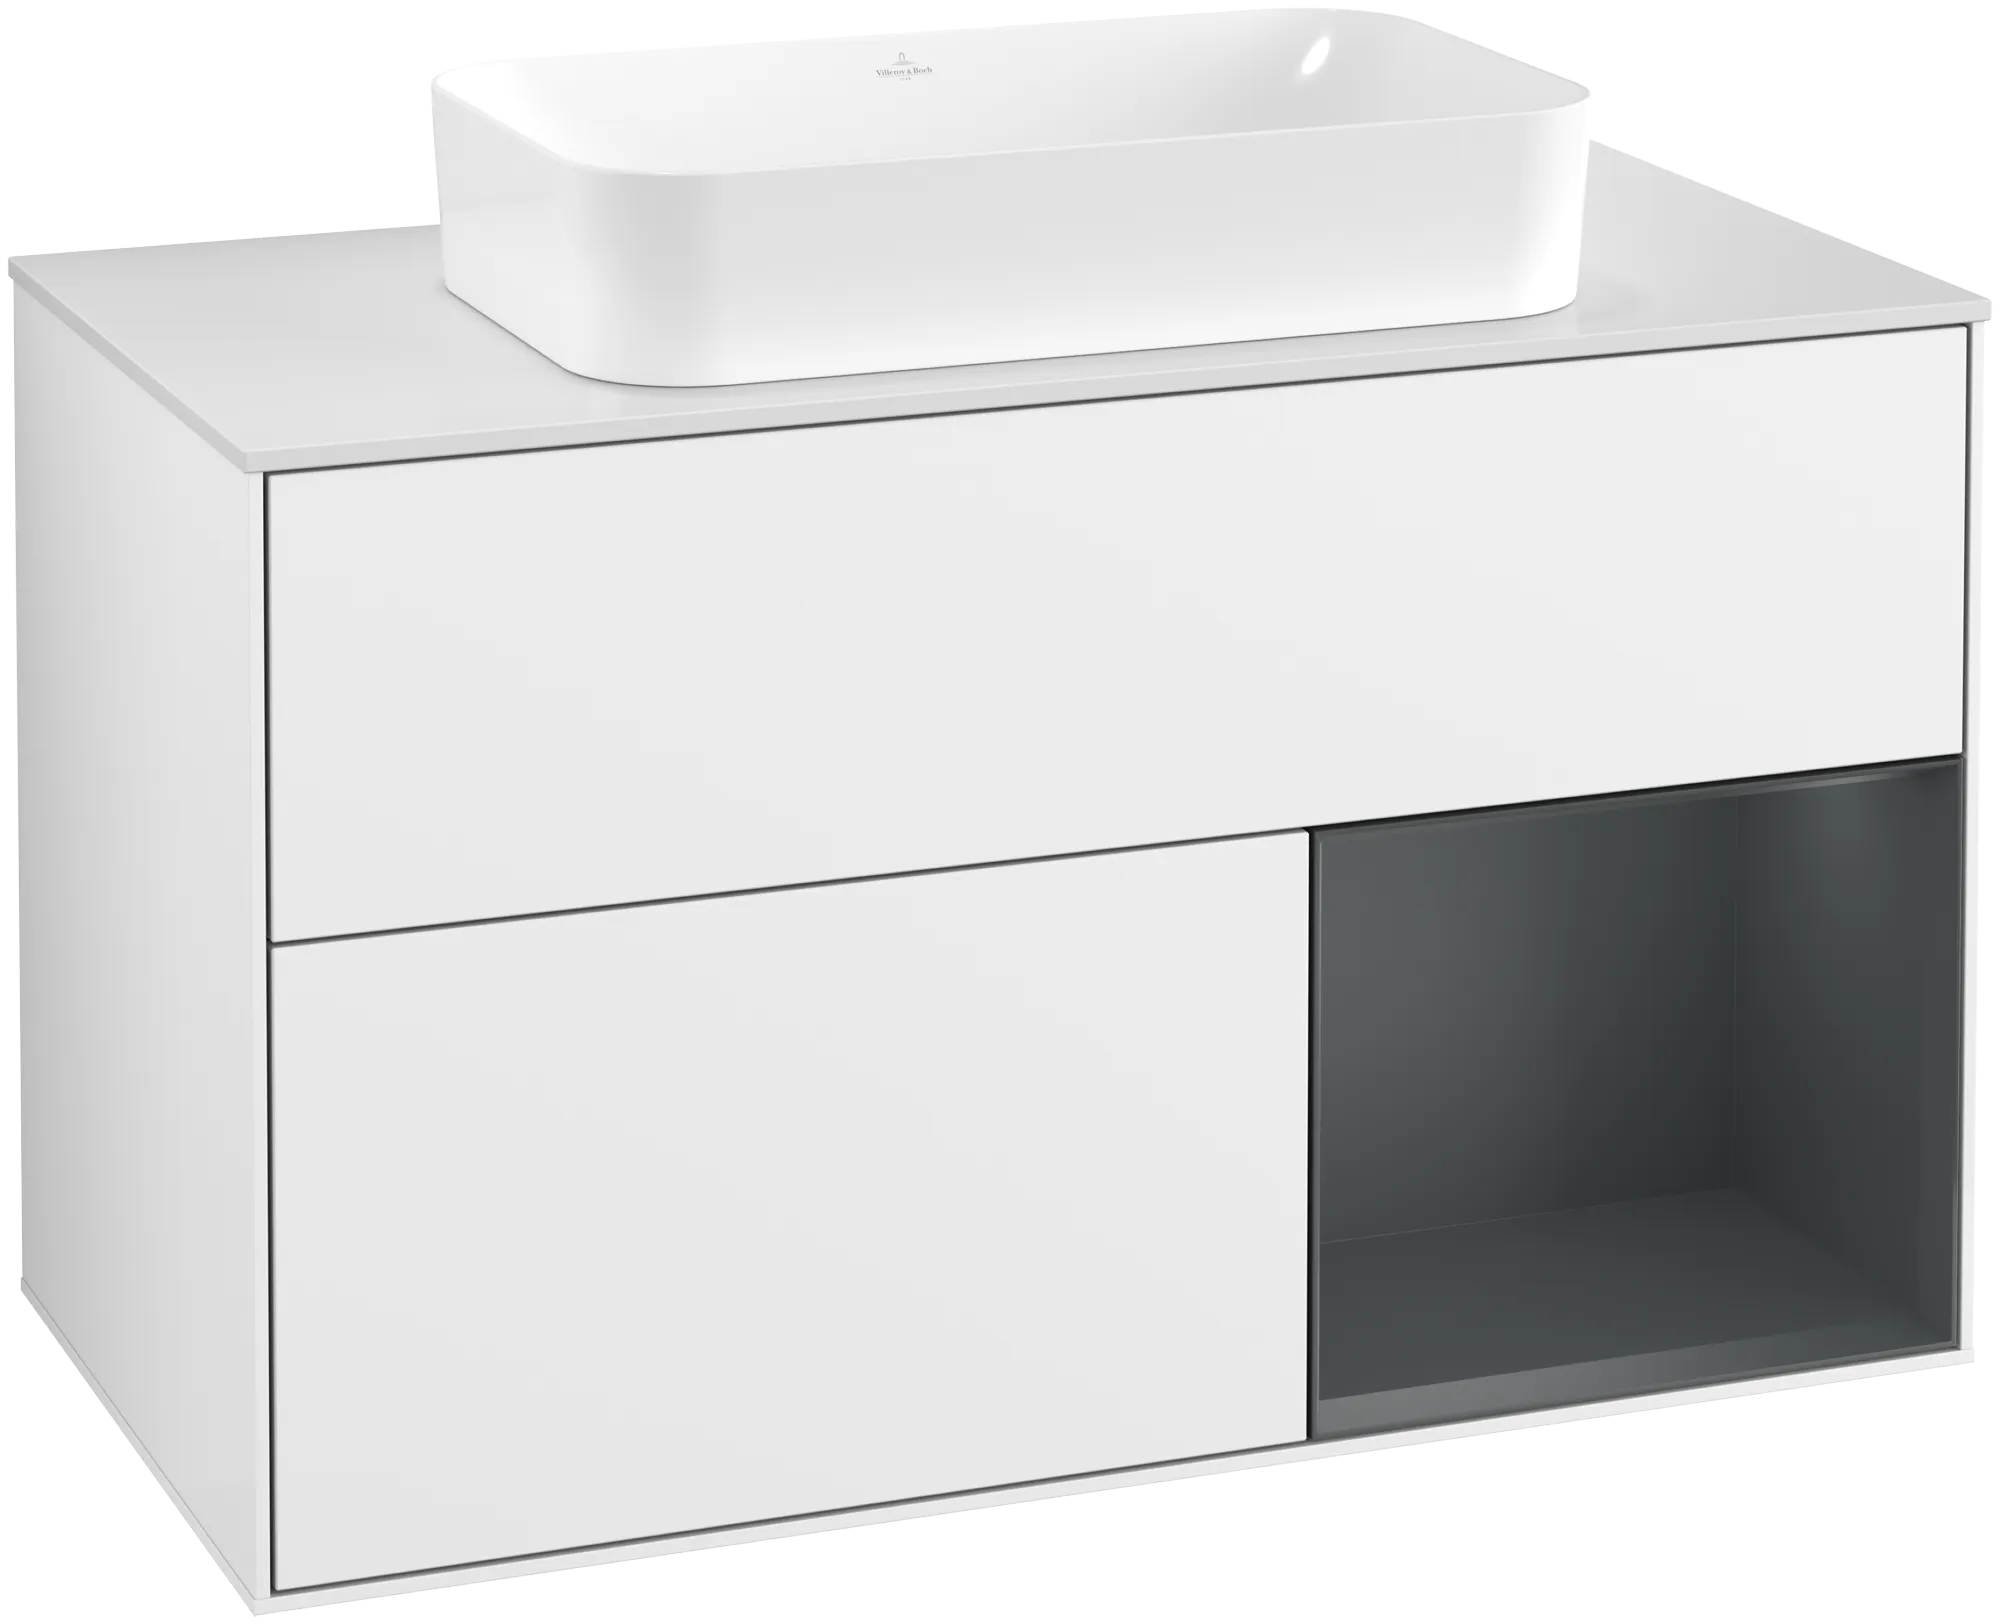 Picture of VILLEROY BOCH Finion Vanity unit, with lighting, 2 pull-out compartments, 1000 x 603 x 501 mm, Glossy White Lacquer / Midnight Blue Matt Lacquer / Glass White Matt #G661HGGF